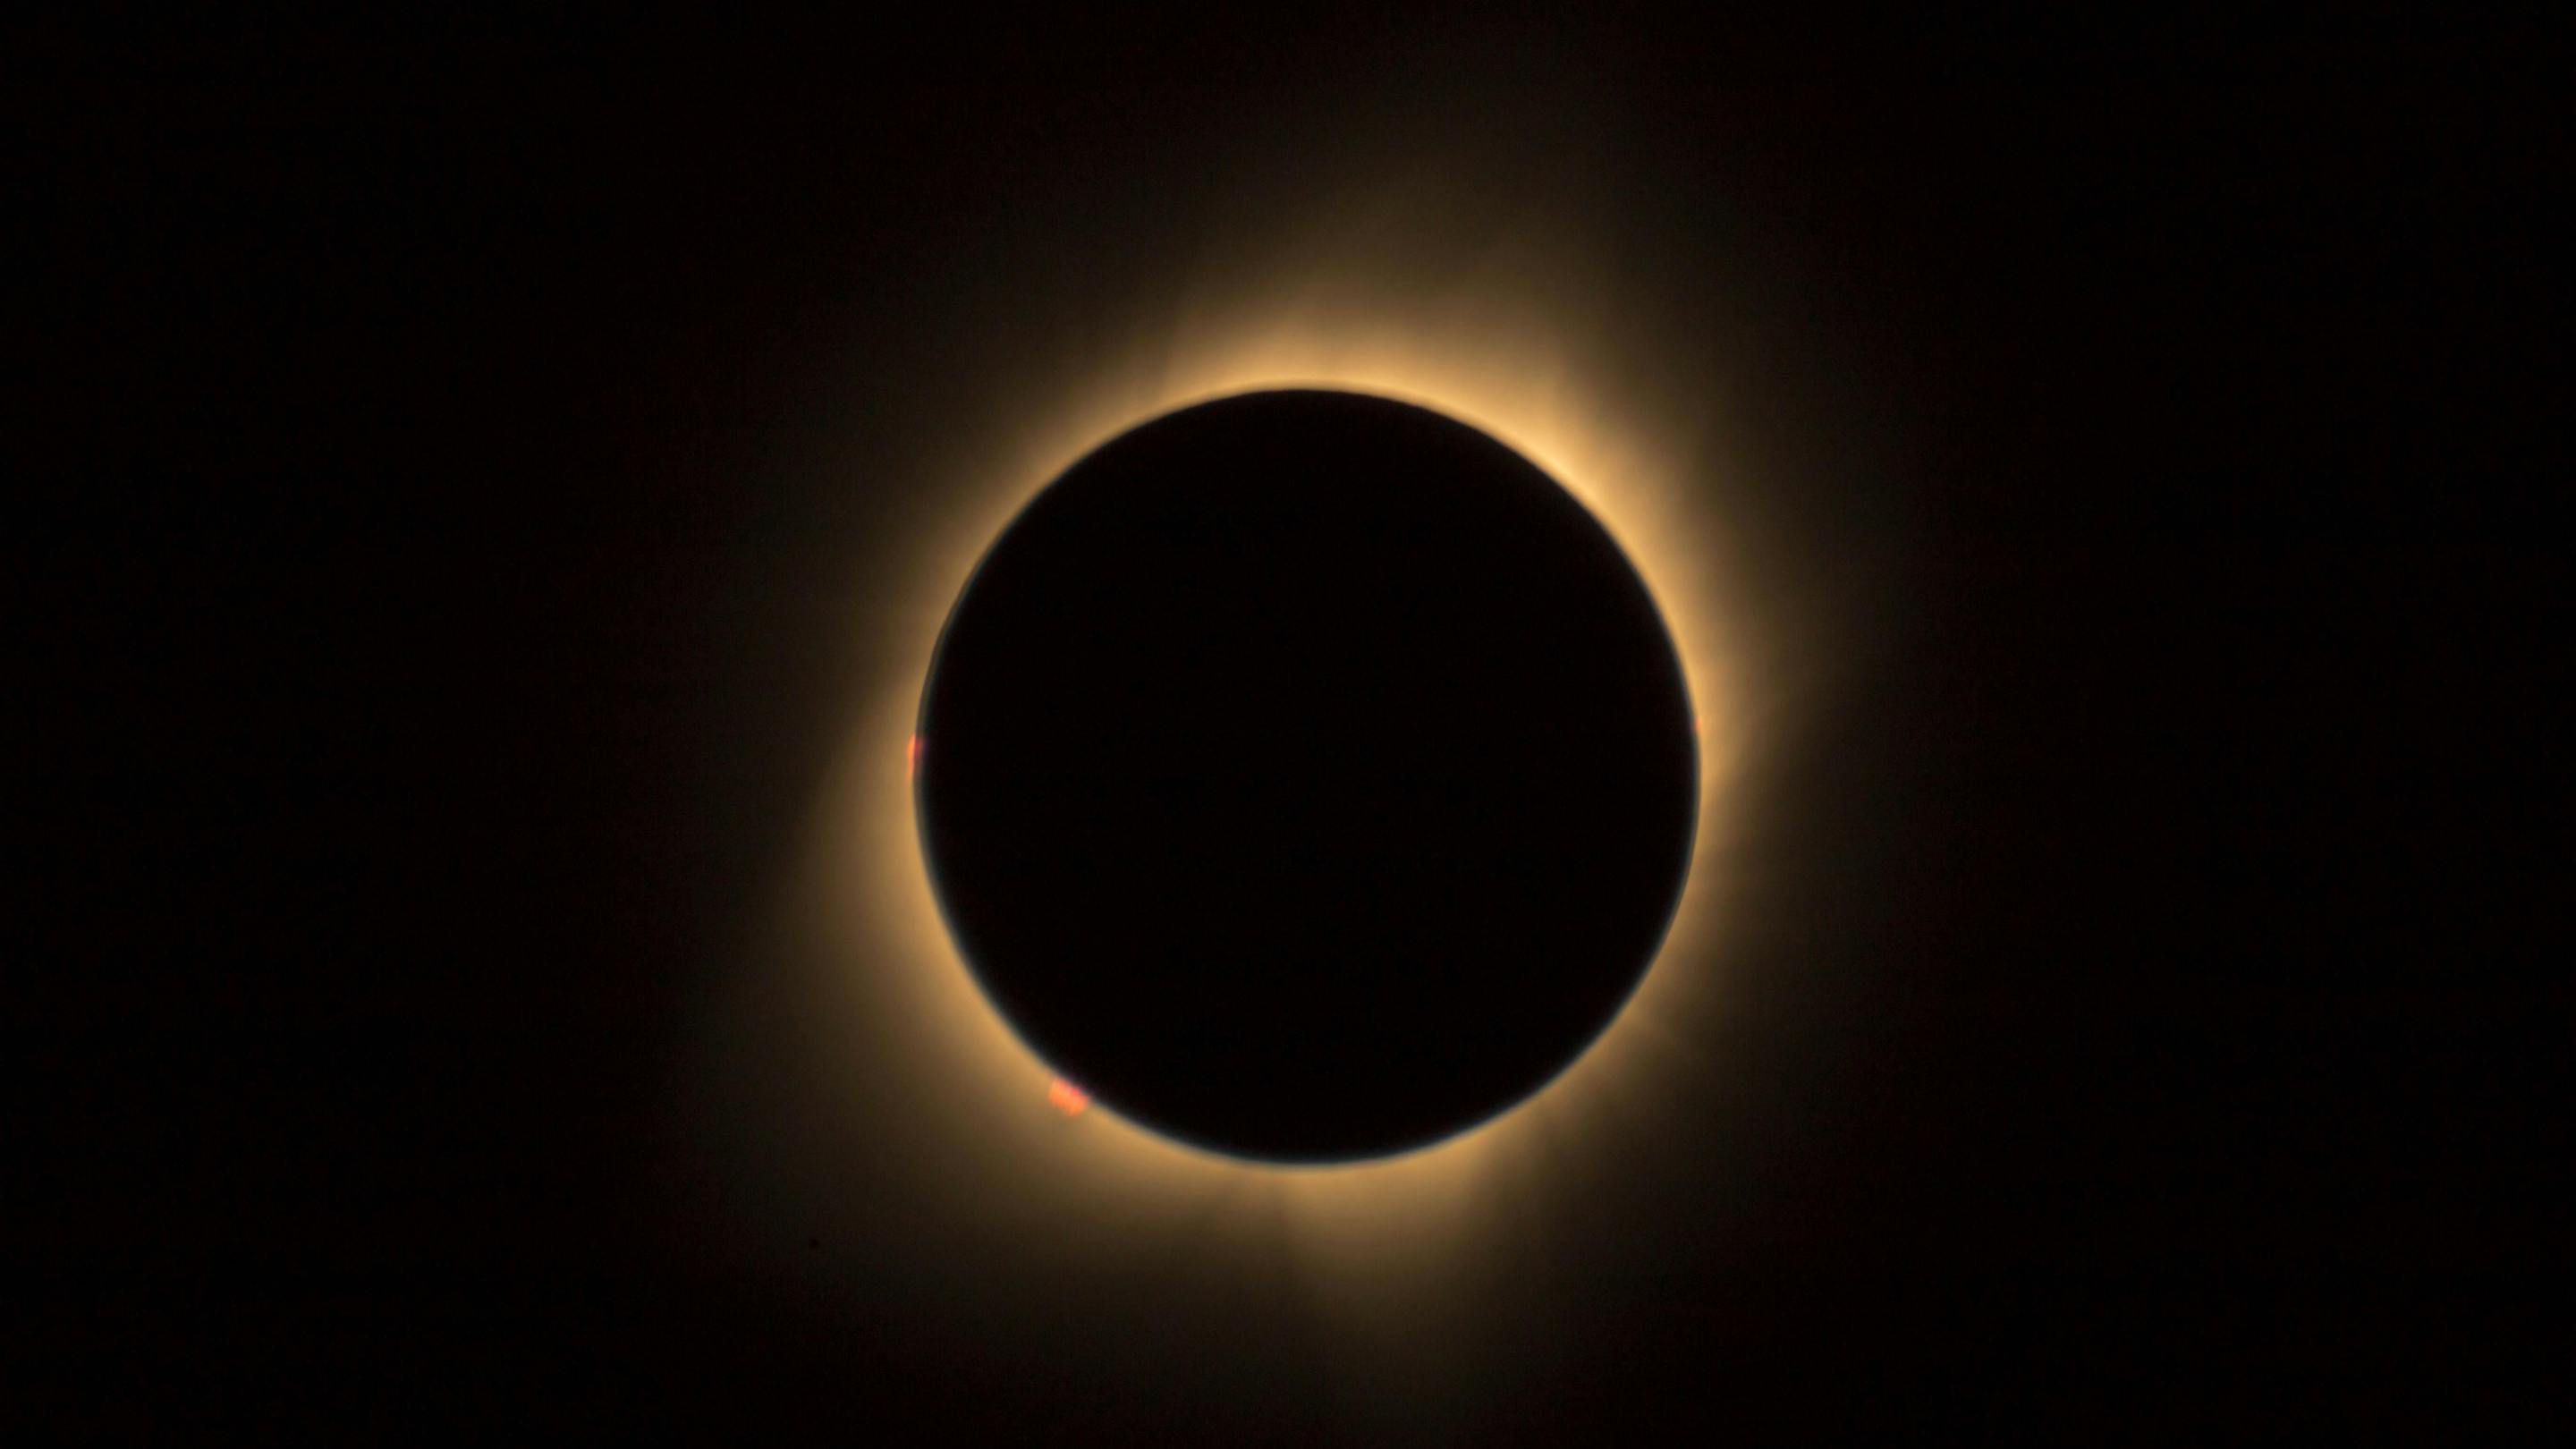 An image of a solar eclipse: a round black moon over a yellow sun, on a black background